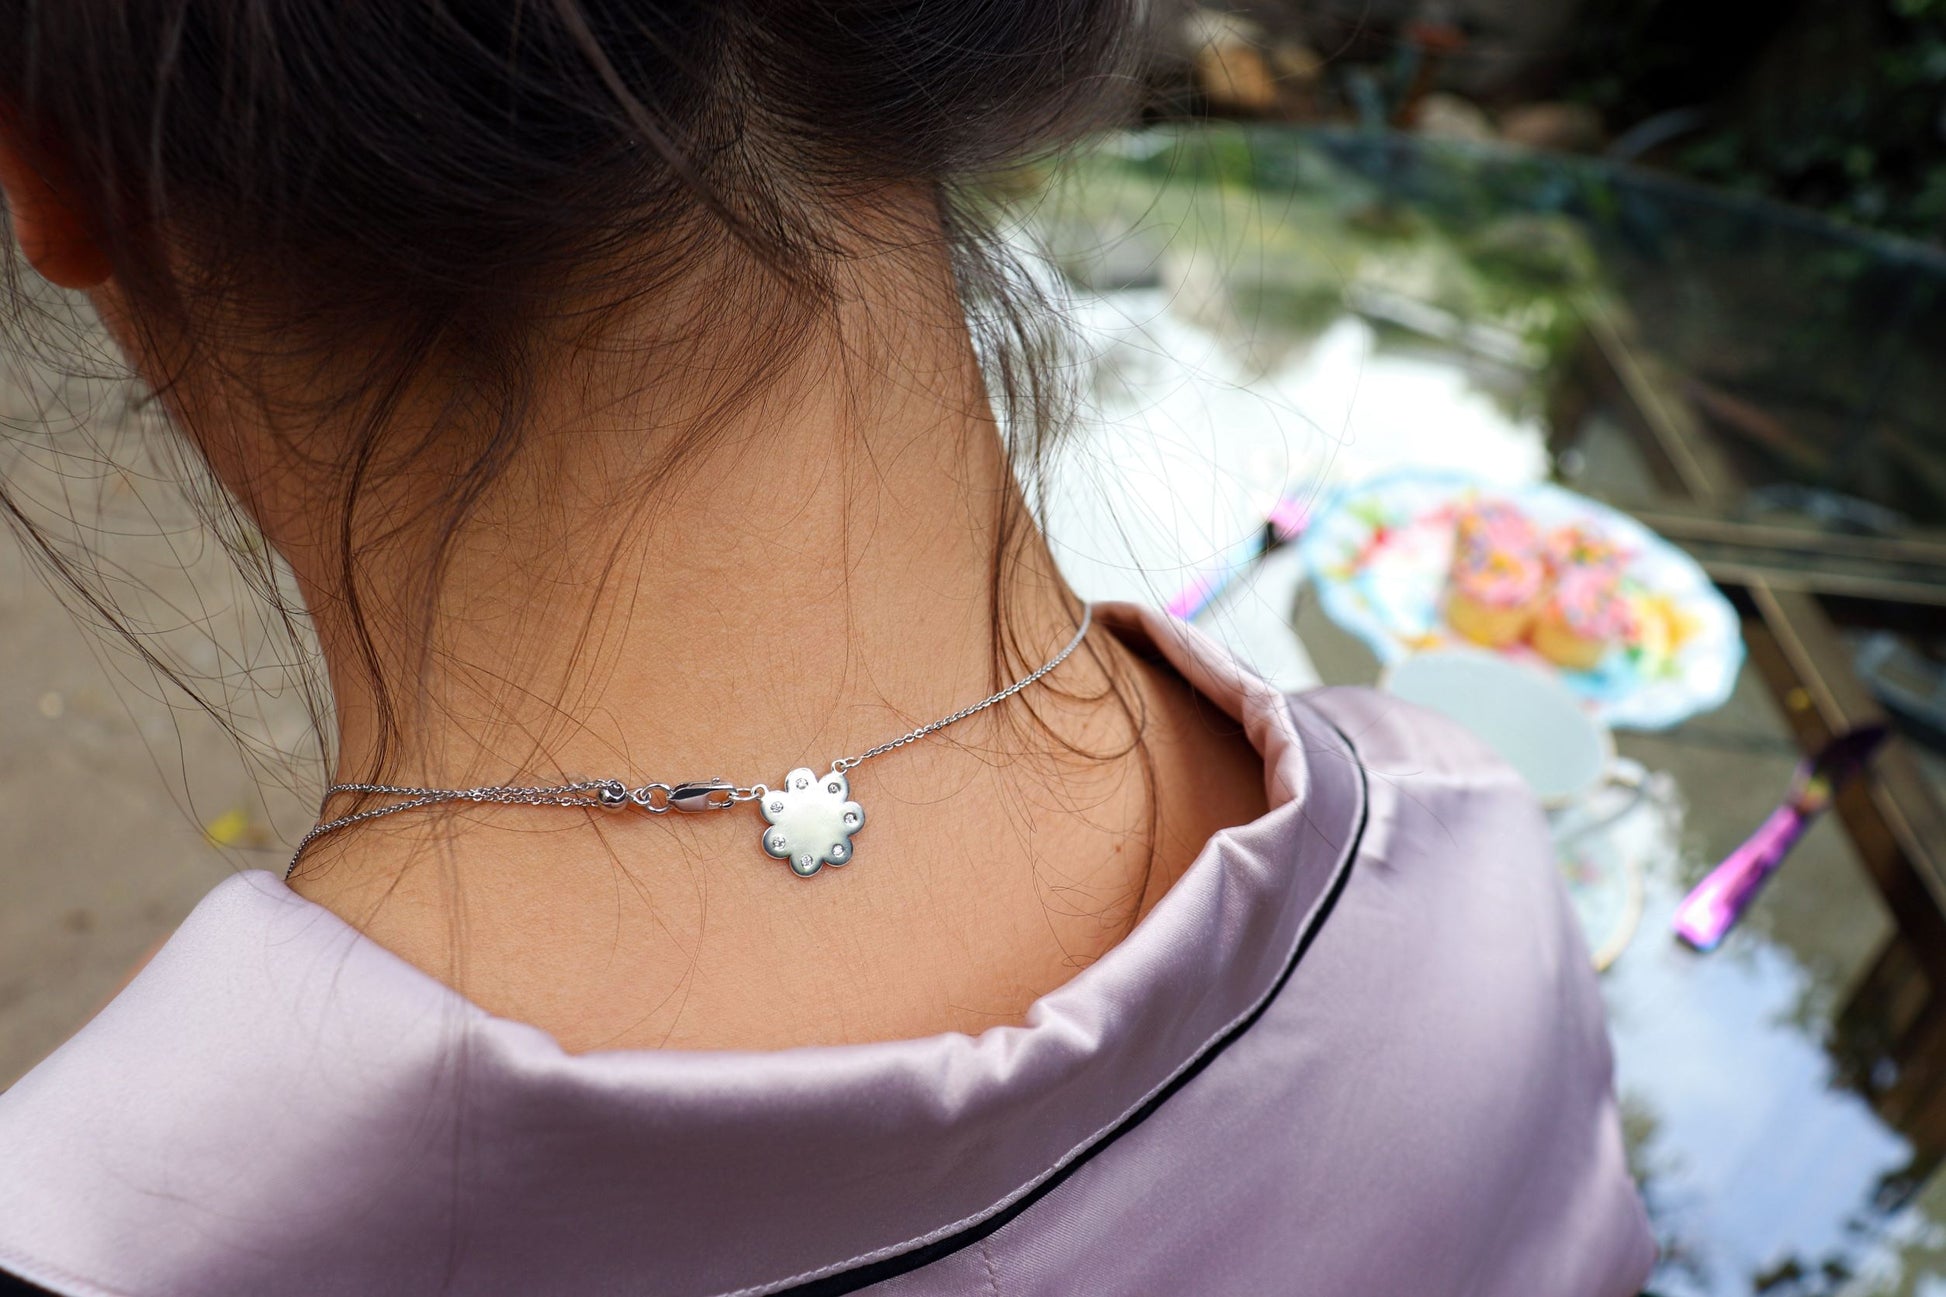 seven diamond logo plate shown on back of a  woman's neck from the wandering jewel